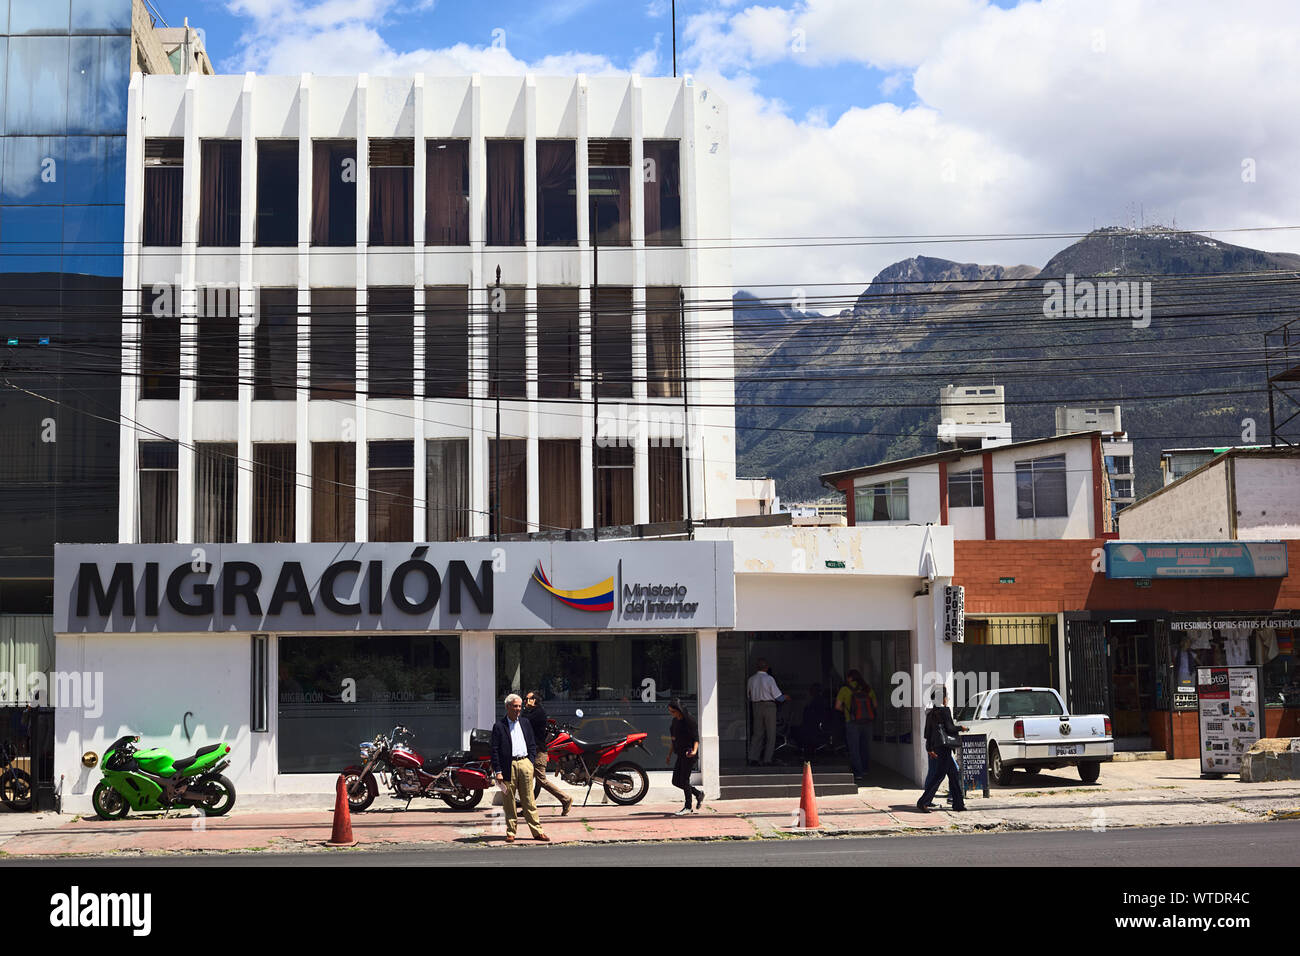 QUITO, ECUADOR - AUGUST 4, 2014: Unidentified people in front of the Migracion (Migration office) building on Amazonas Avenue on August 4, 2014 Stock Photo